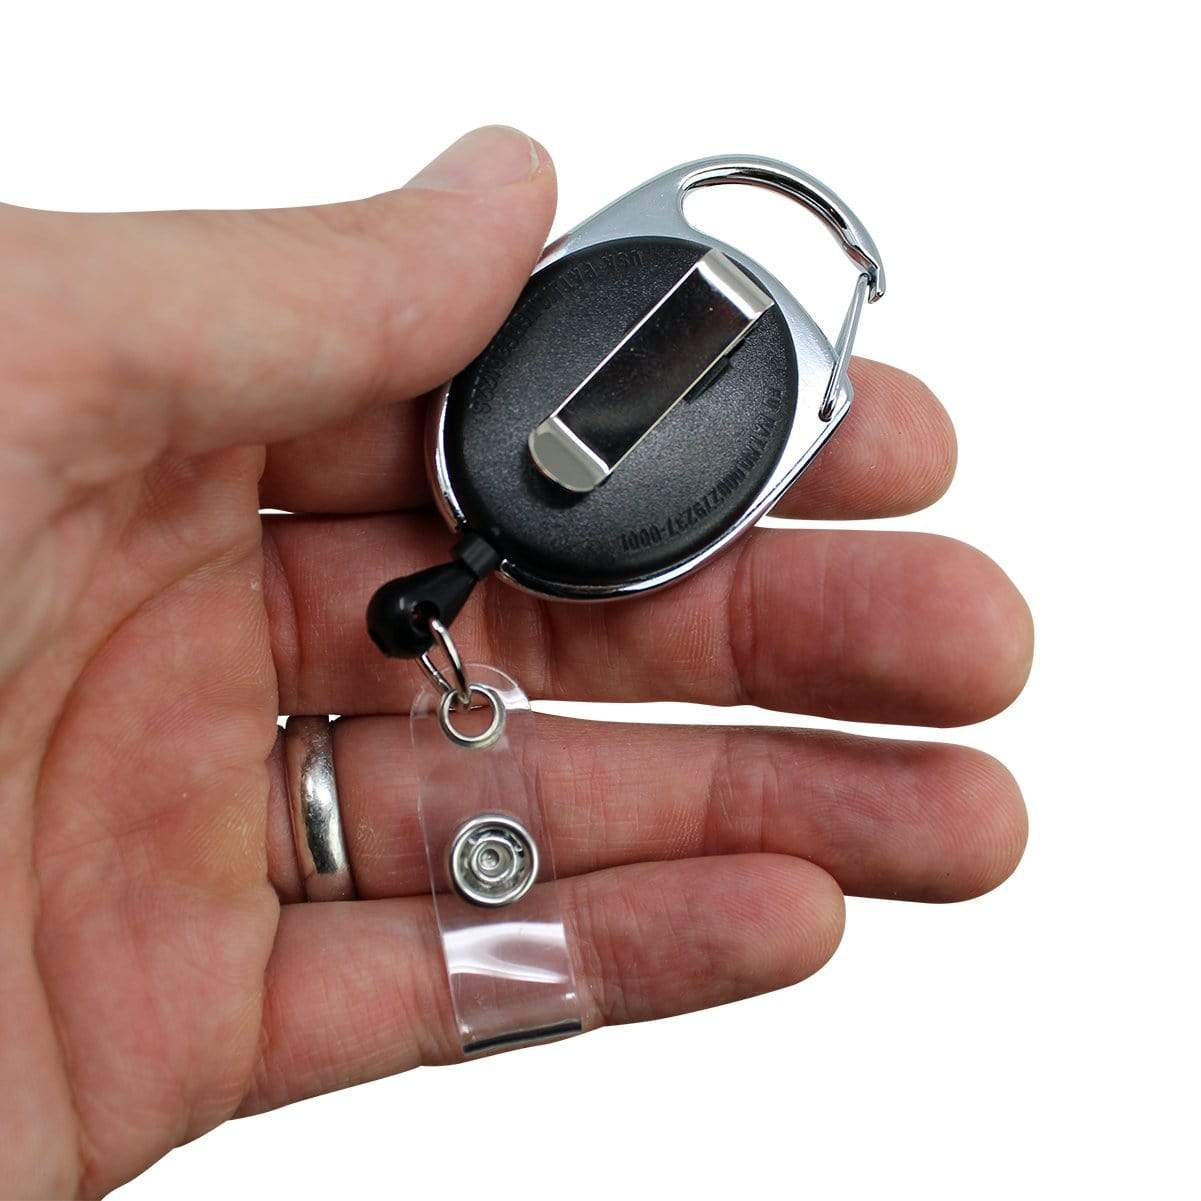 A hand holds a Hard Plastic 3 Card Badge Holder with Badge Reel - Retractable ID Lanyard Features Belt Clip & Carabiner - Rigid Vertical CAC Holder - Top Load Holds Three Cards by SpecialistID.